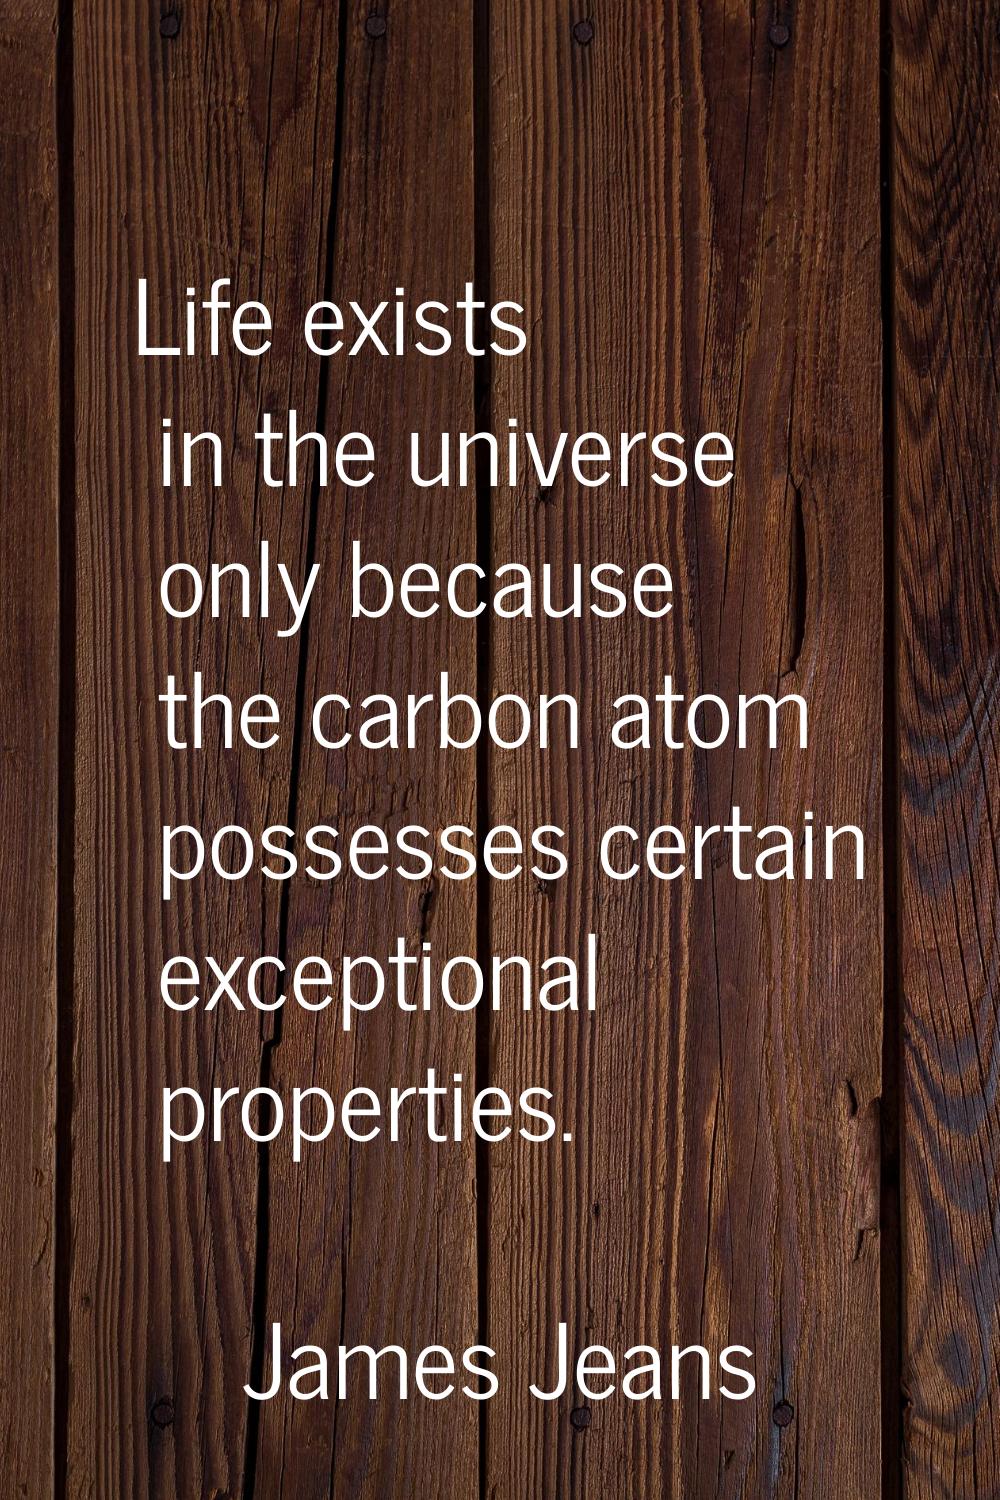 Life exists in the universe only because the carbon atom possesses certain exceptional properties.